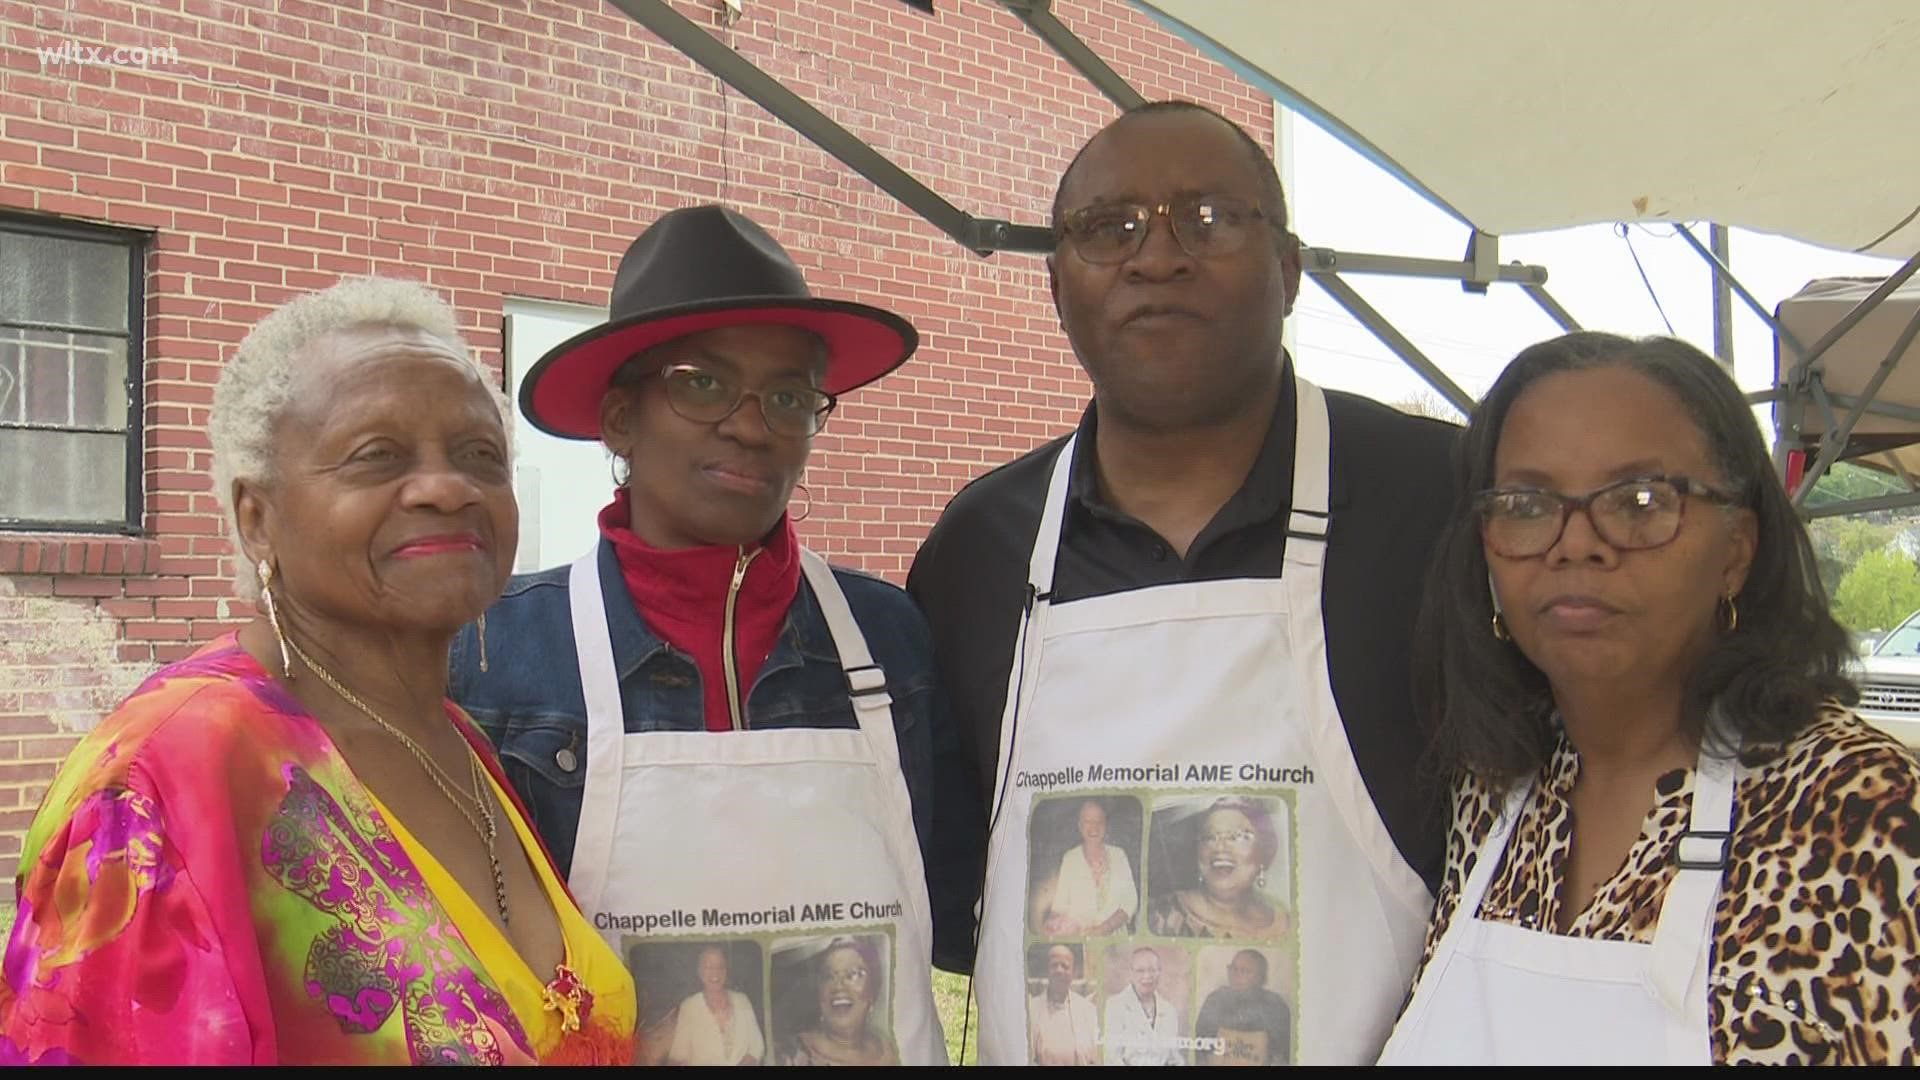 The Bennetts have been hosting Thanksgiving for their community for the last eight years.